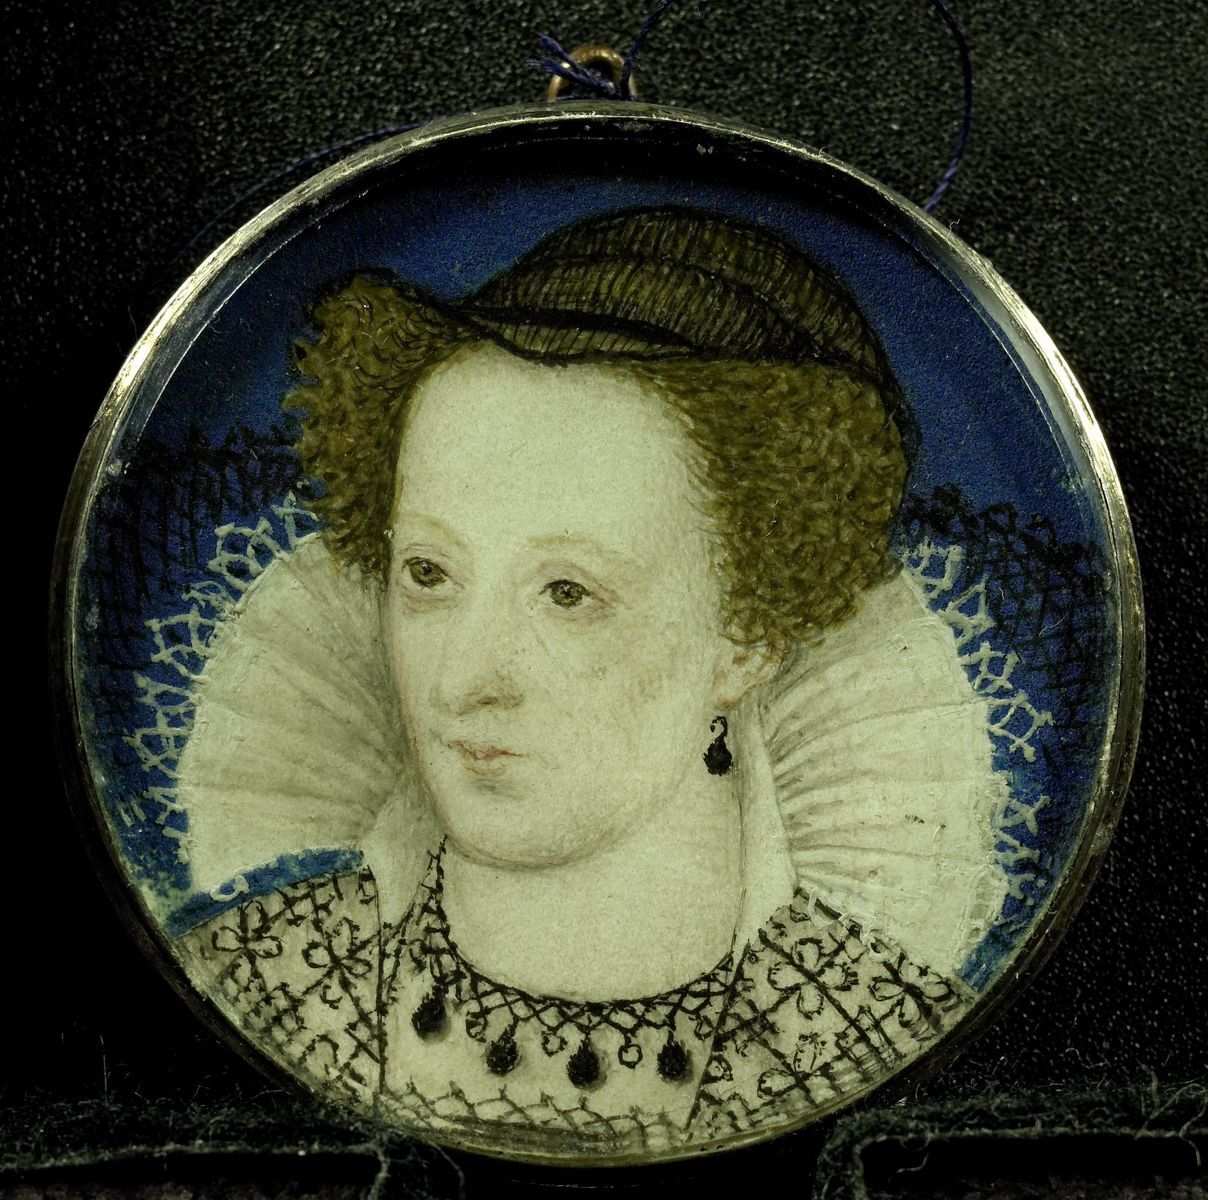 <a href="https://www.biography.com/royalty/mary-queen-of-scots" rel="noreferrer noopener">Mary Stuart</a> became queen of Scotland only a few days after her birth, then queen consort of France. She is remembered for her three successive marriages, her rivalry with cousin Elizabeth I of England, her long imprisonment, and her execution on the latter's orders. In fact, her political achievements were meager after spending most of her reign in France and failing, upon her return, to reconcile with the Protestants who had taken over Scotland.